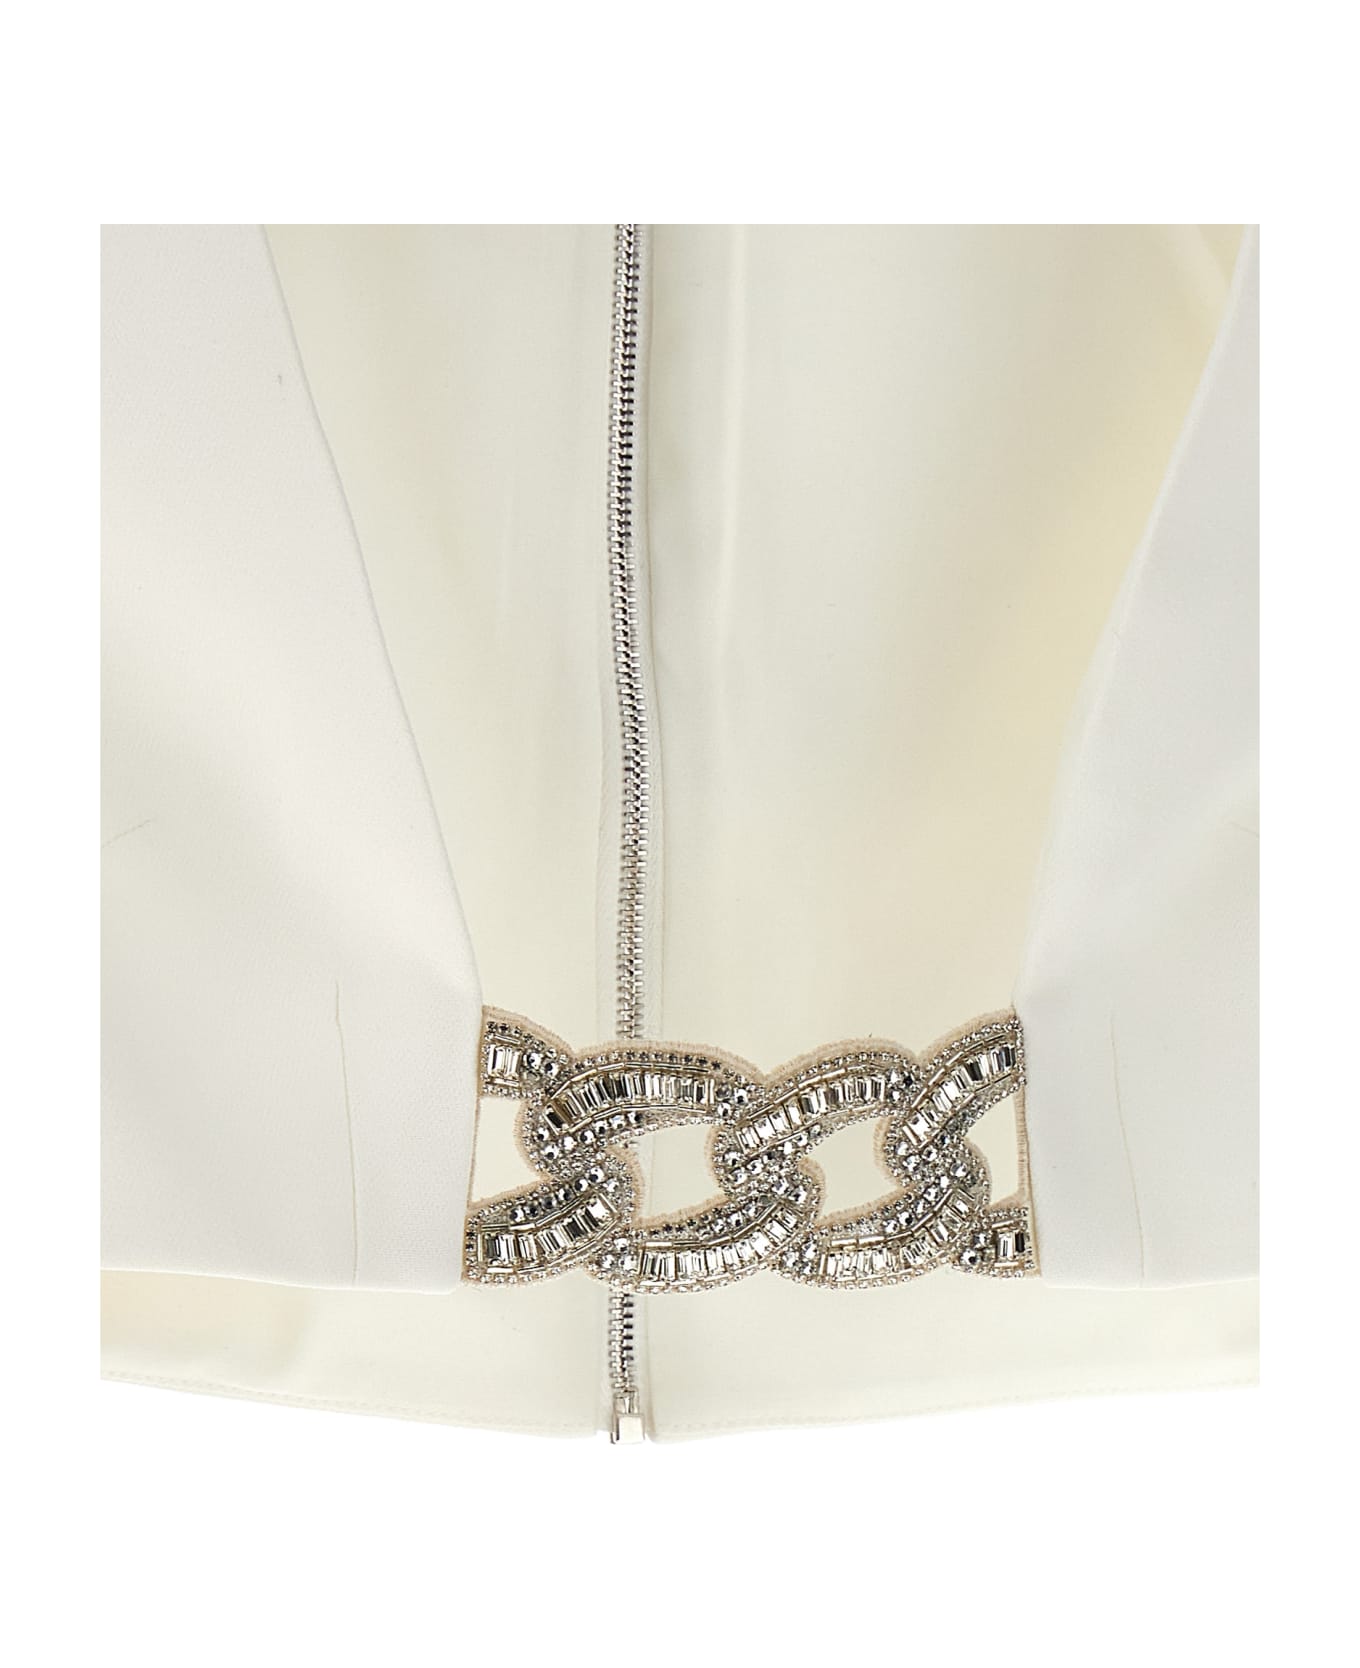 David Koma Top '3d Crystsal Chain And Square Neck' - White